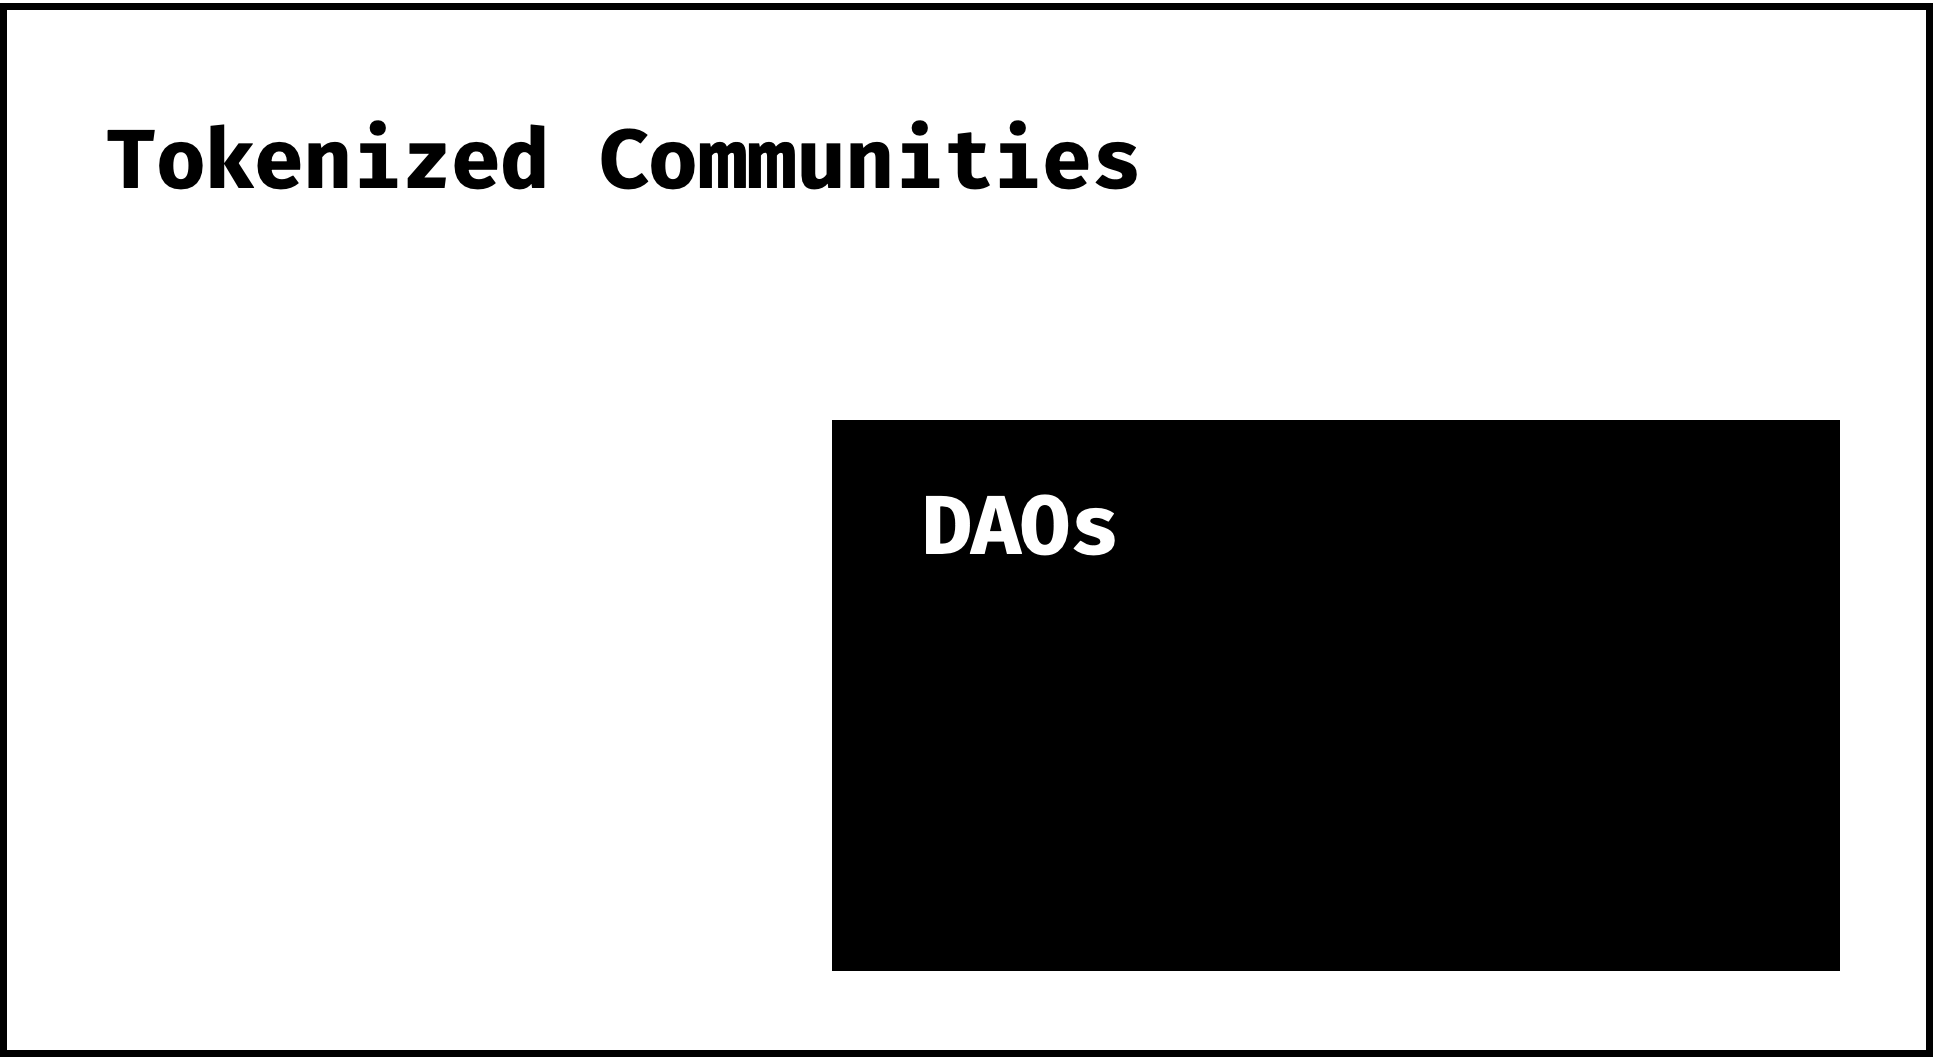 Not all tokenized communities are DAOs